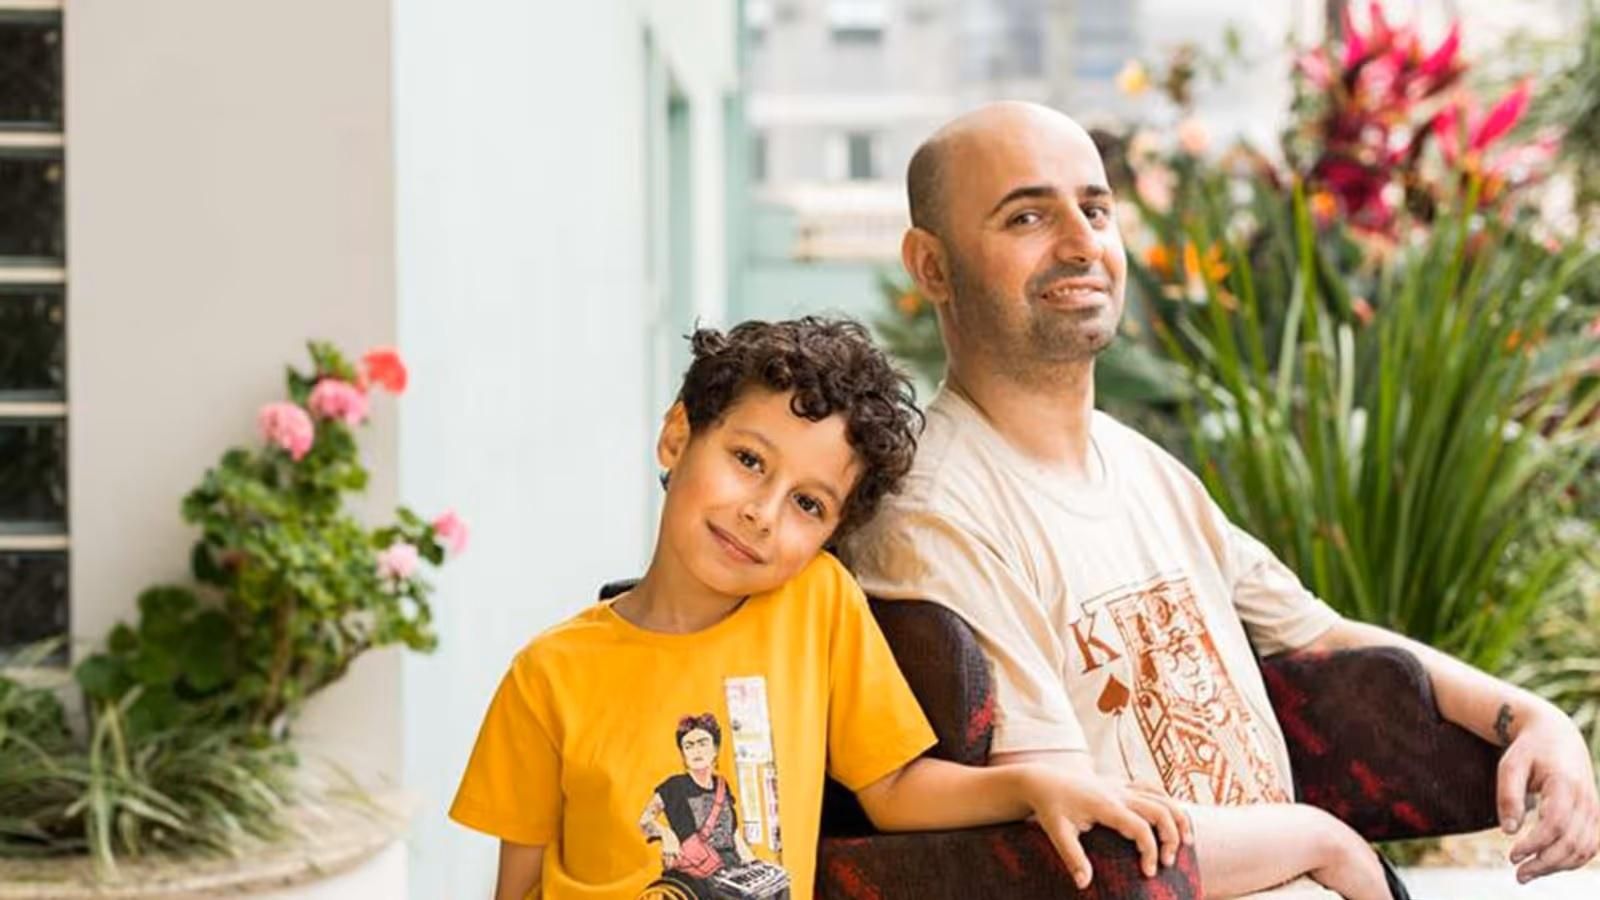 Jaime and his son from Brazil, Primary Progressive Multiple Sclerosis